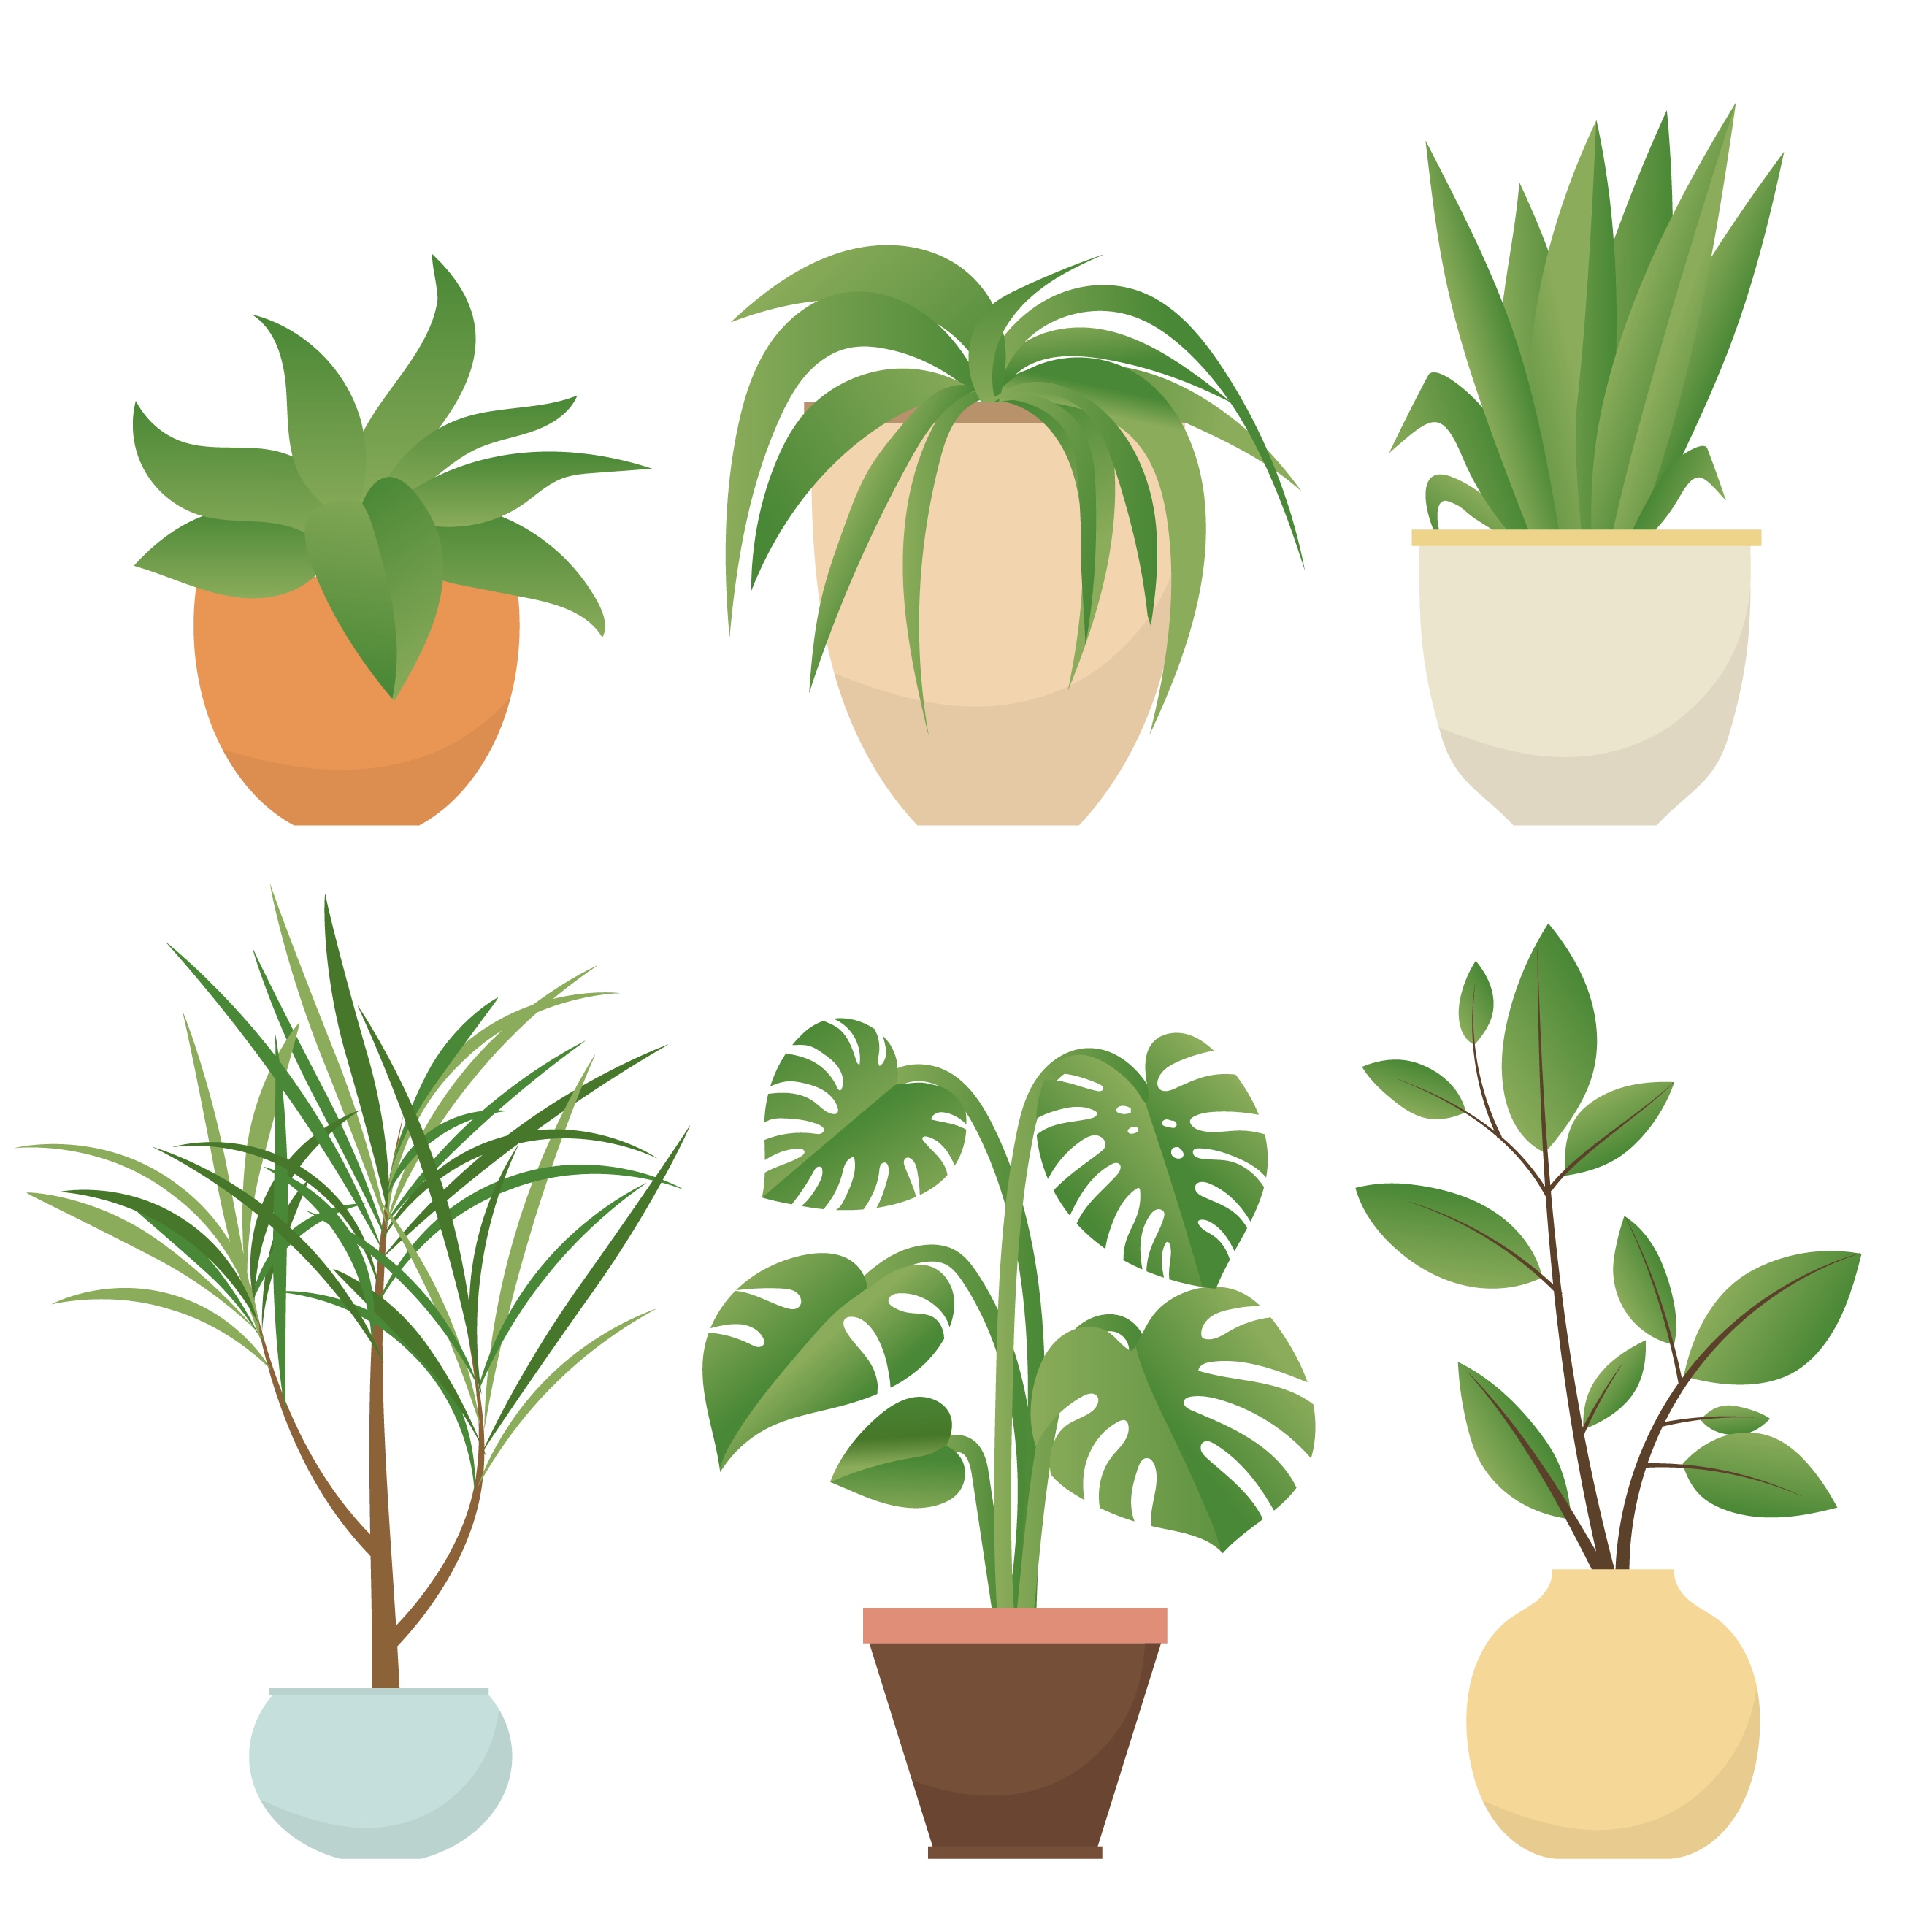 Potted Art, Icons, and for Free Download